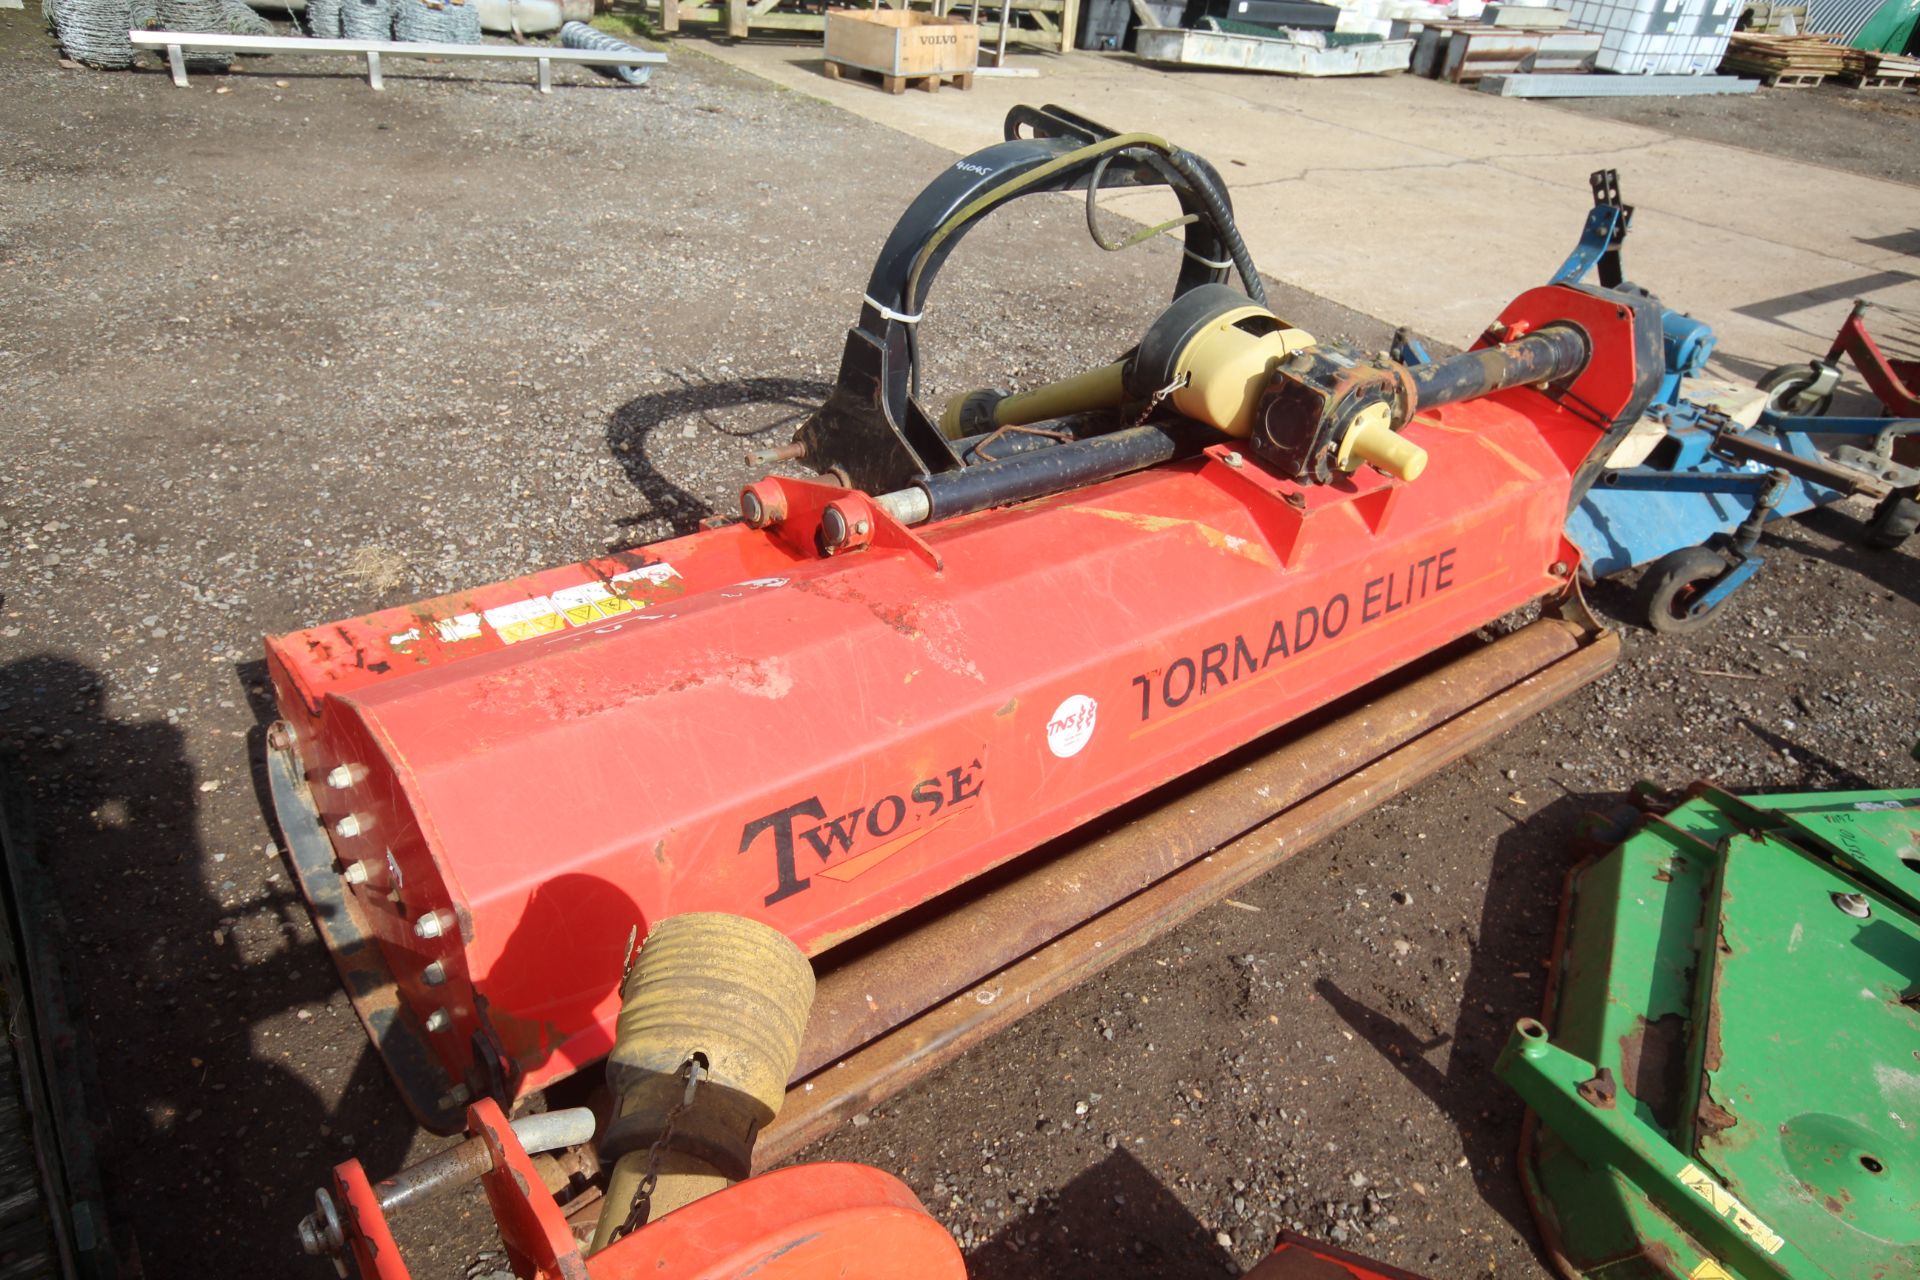 Twose Tornado Elite 7ft6in flail mower. With rear roller and sideshift. V - Bild 4 aus 15